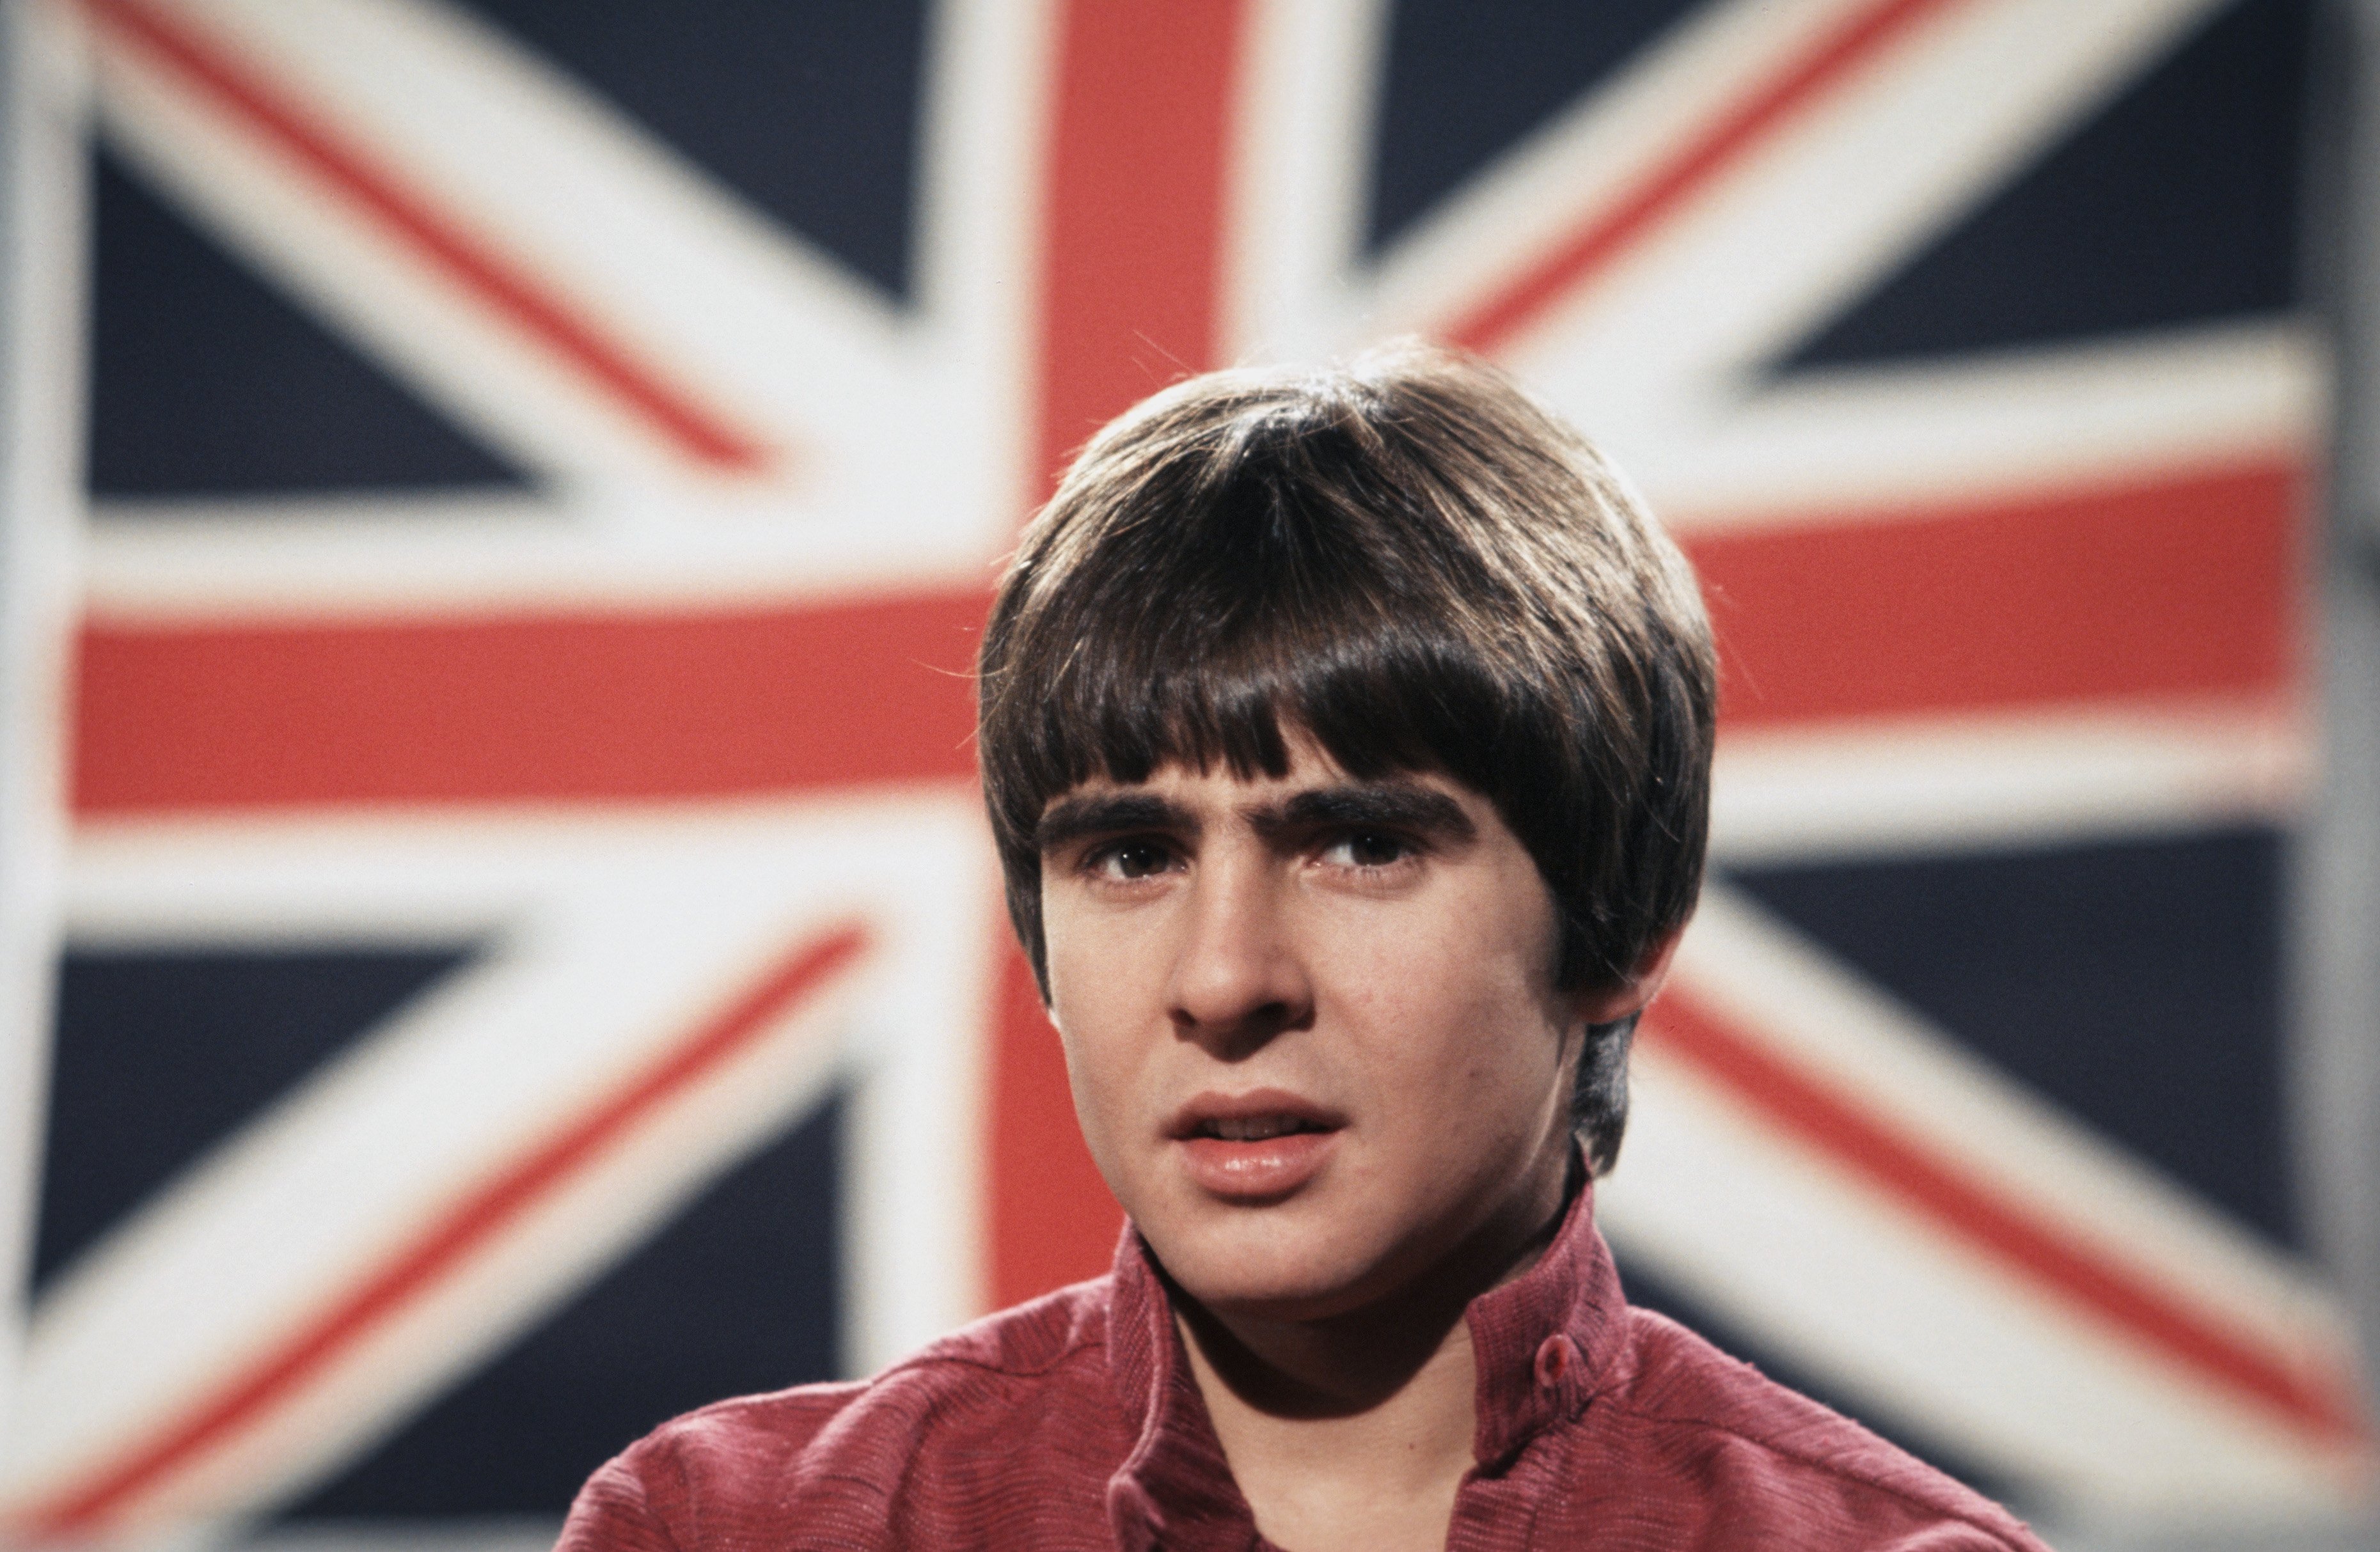 The Monkees' Davy Jones in front of a flag